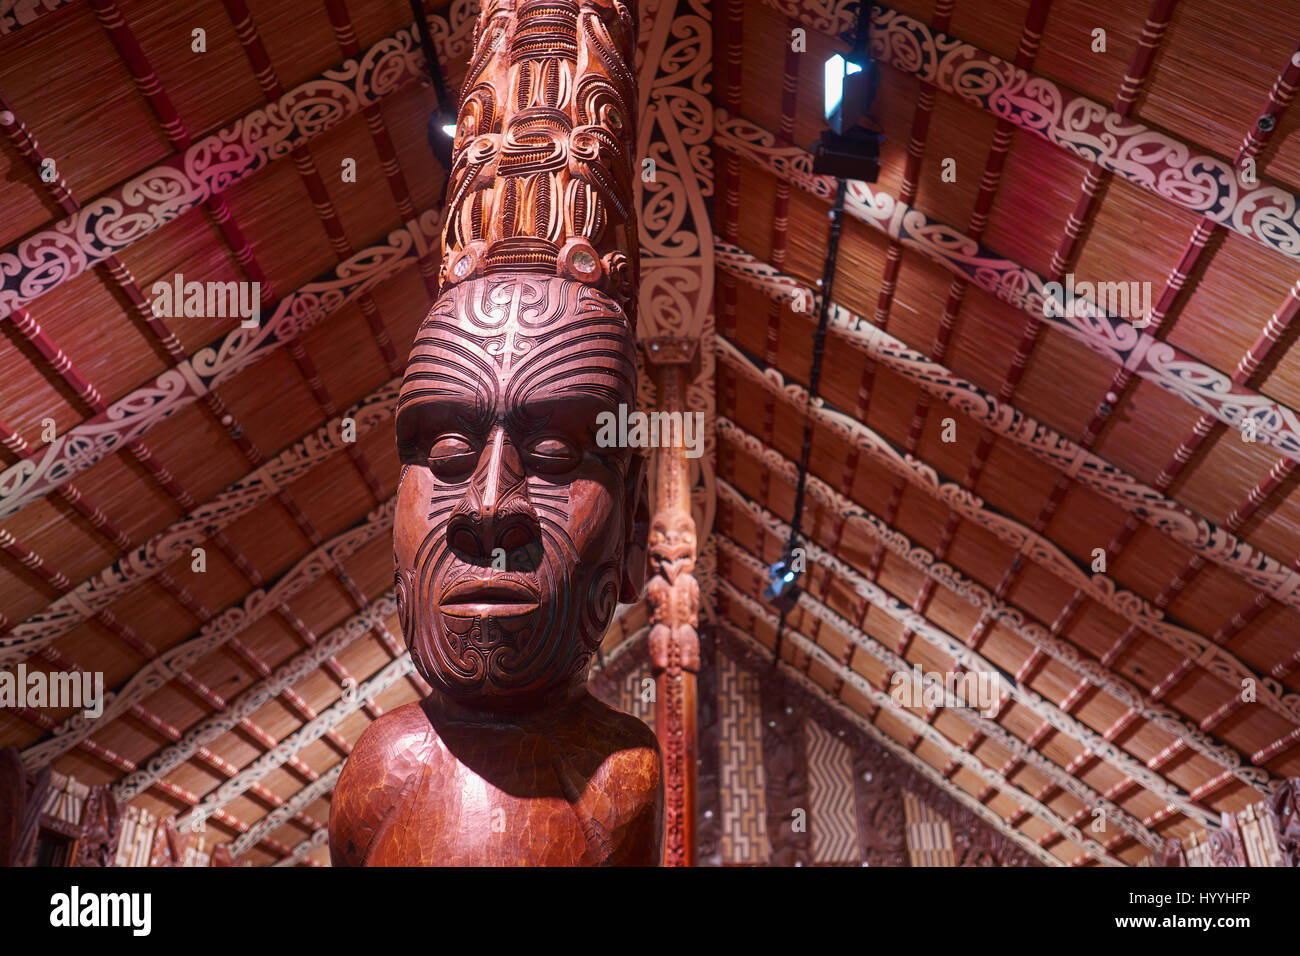 Maori carving of a chief in a marae meeting house - Waitangi, Northland, New Zealand Stock Photo